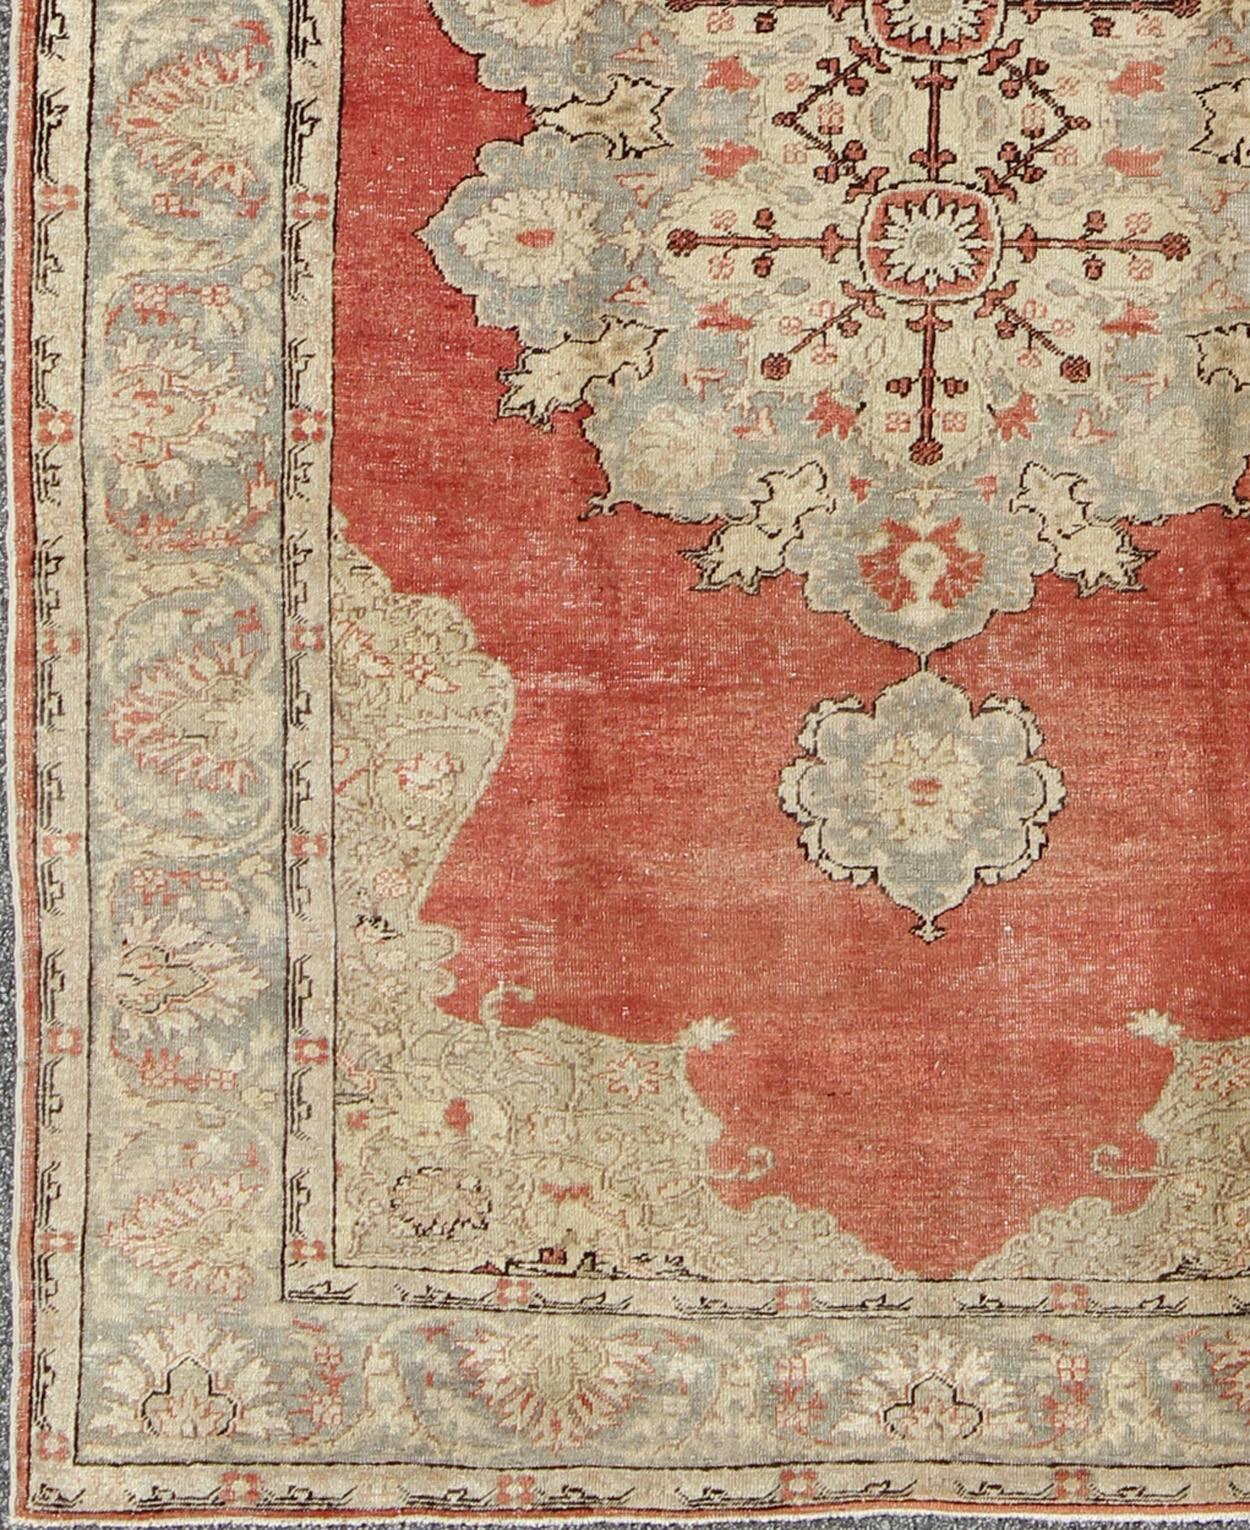 Classic Antique Sivas Rug Turkish in Medallion Design With Coral Red Field & Light Green     

Sub-Geometric Medallion Turkish Sivas antique rug with faded coral red field, rug el-15351, country of origin / type: Turkey / Oushak, circa